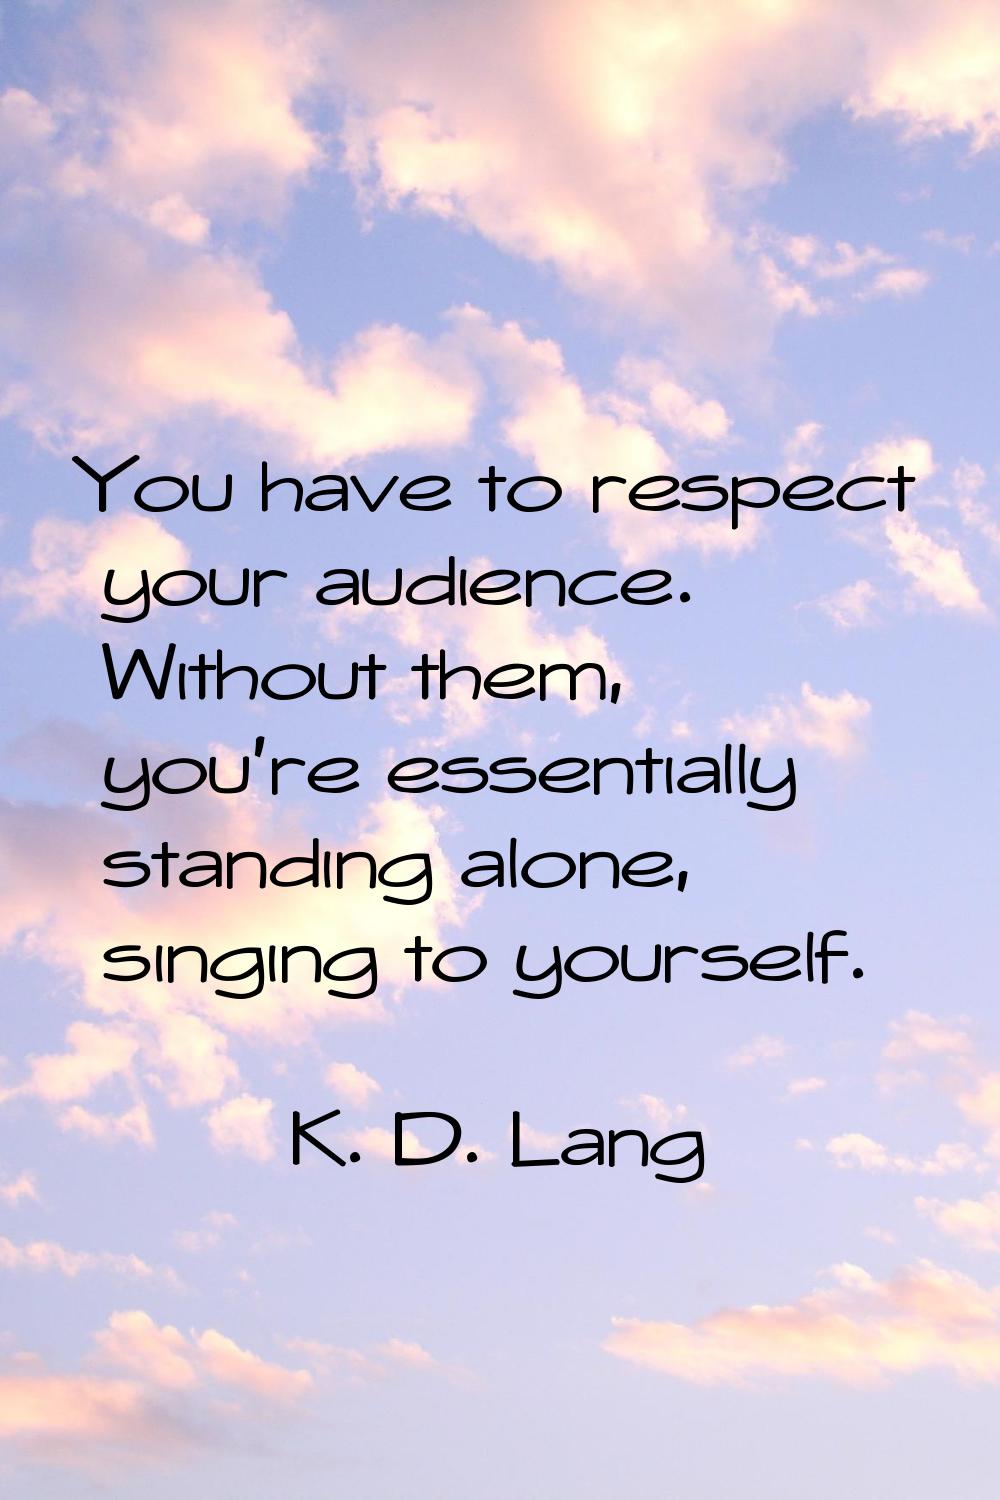 You have to respect your audience. Without them, you're essentially standing alone, singing to your